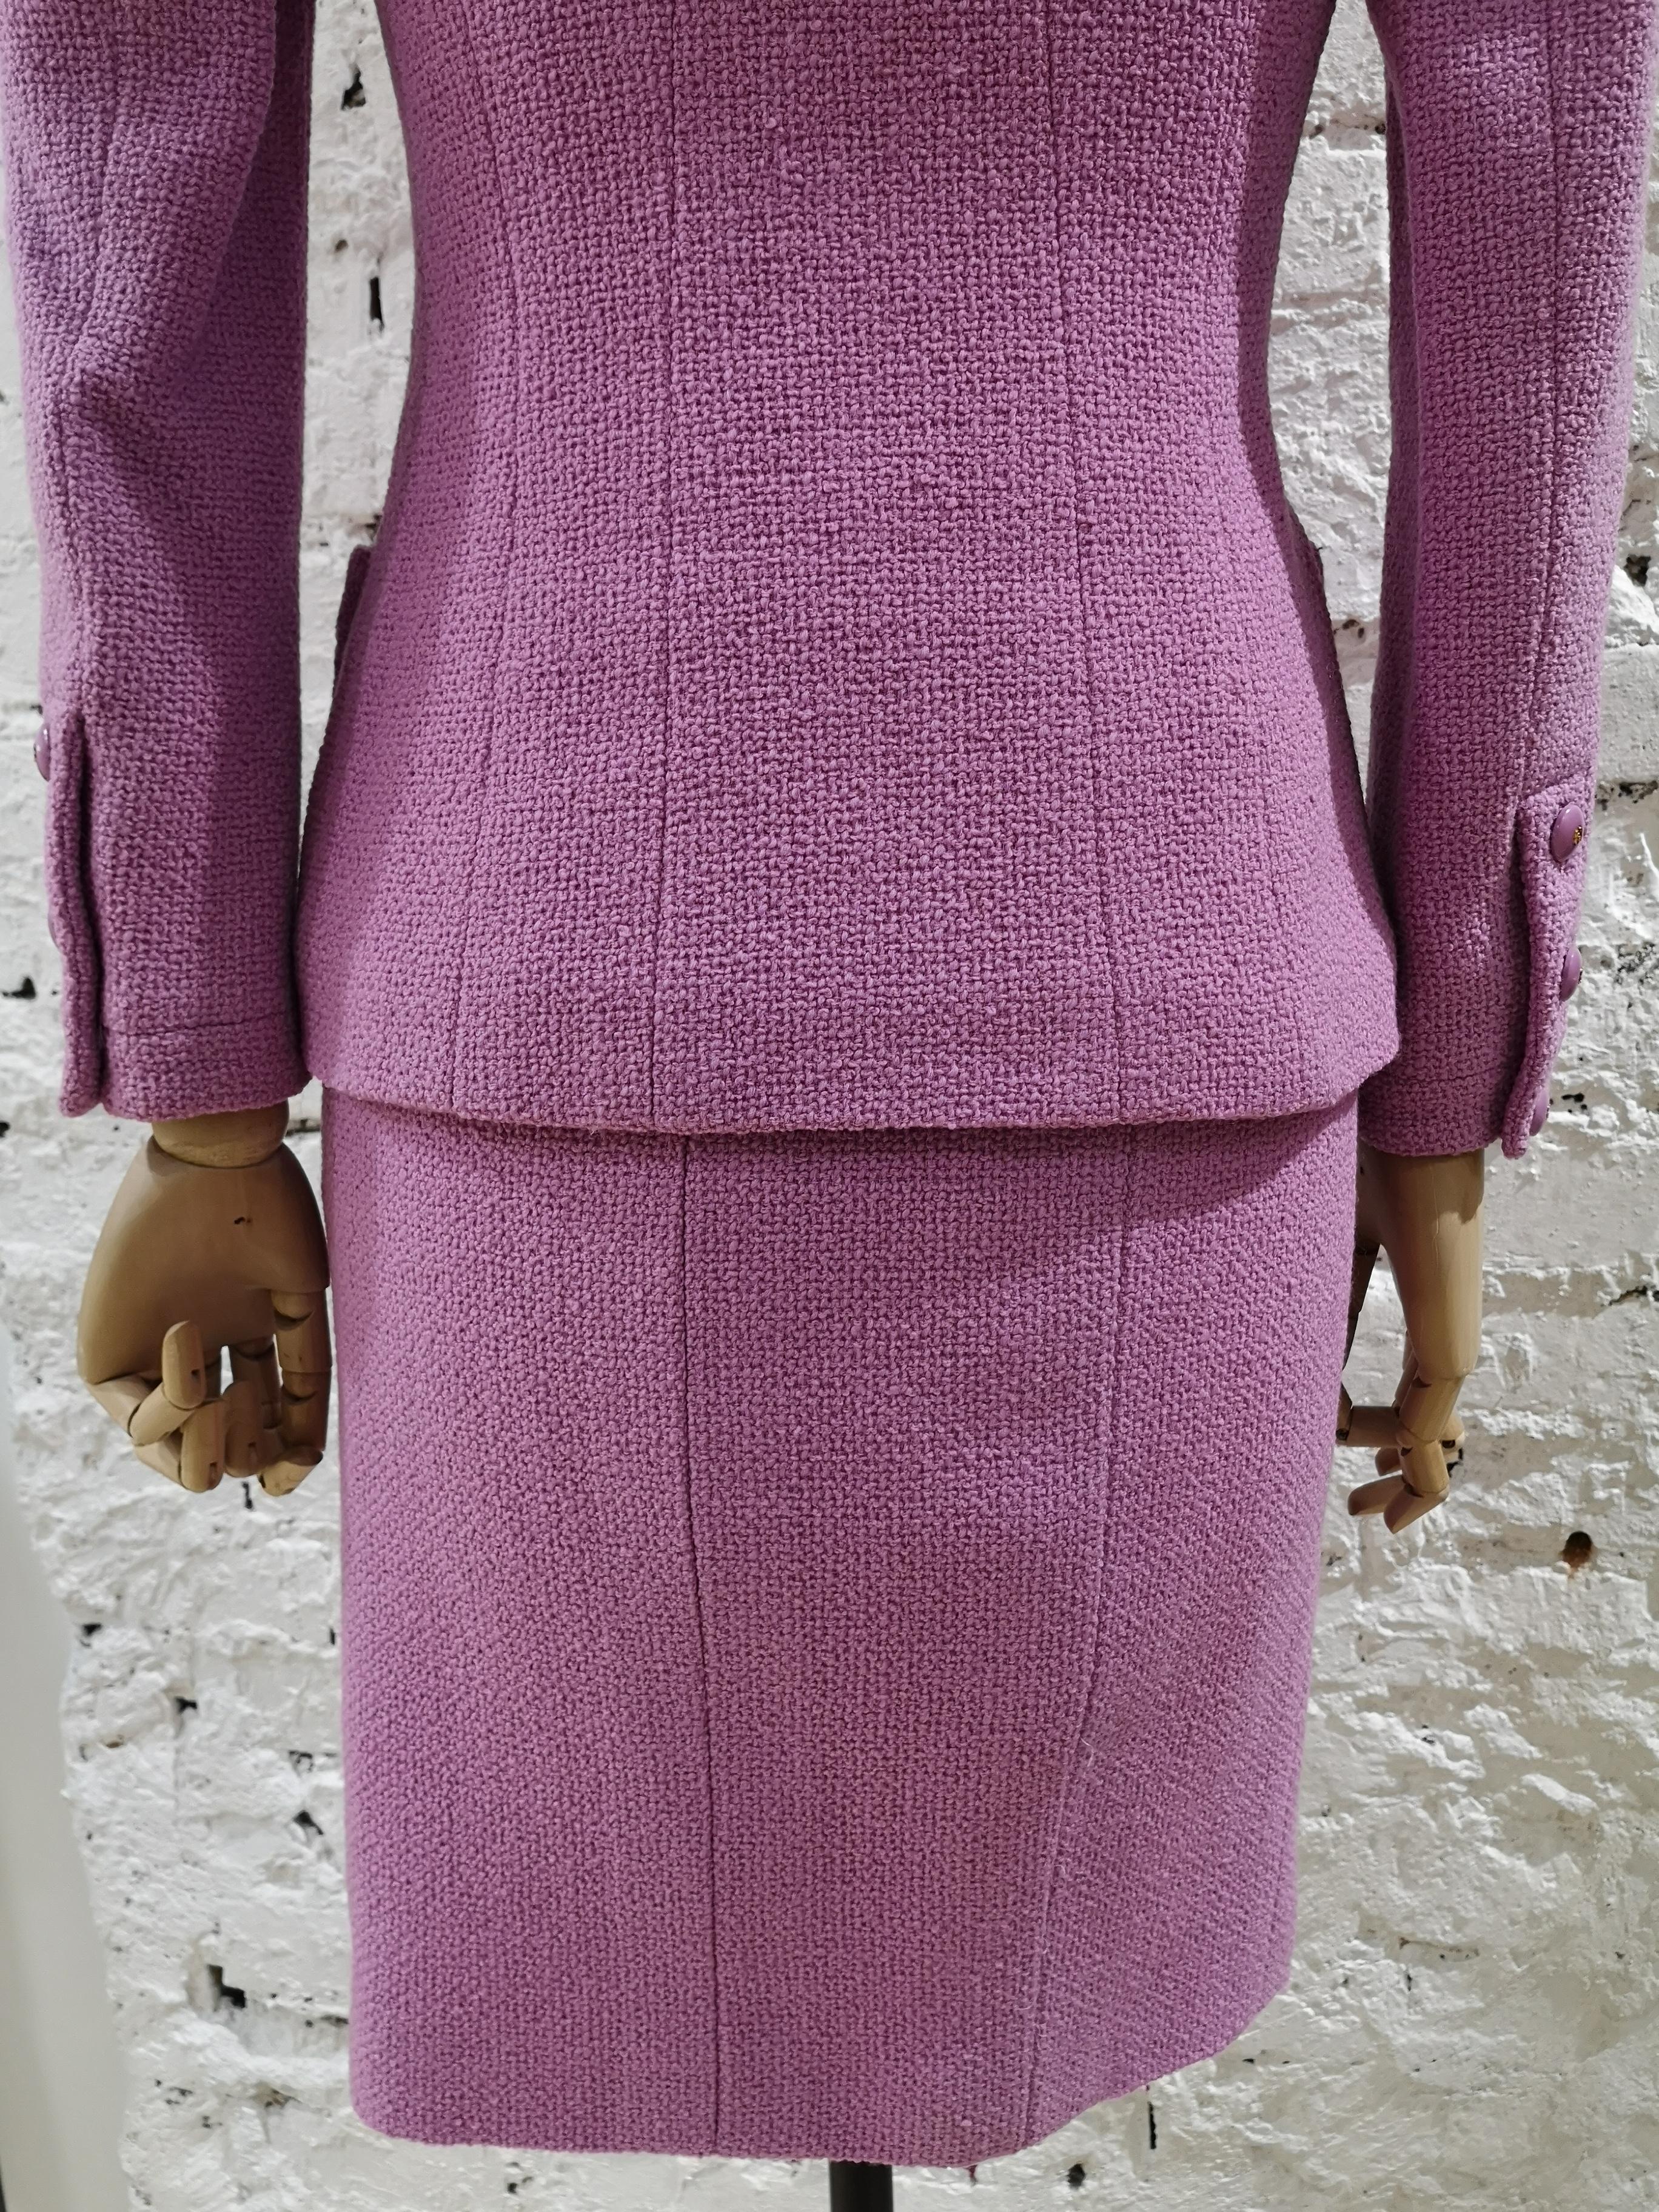 Chanel wisteria Wool Skirt Suit 6